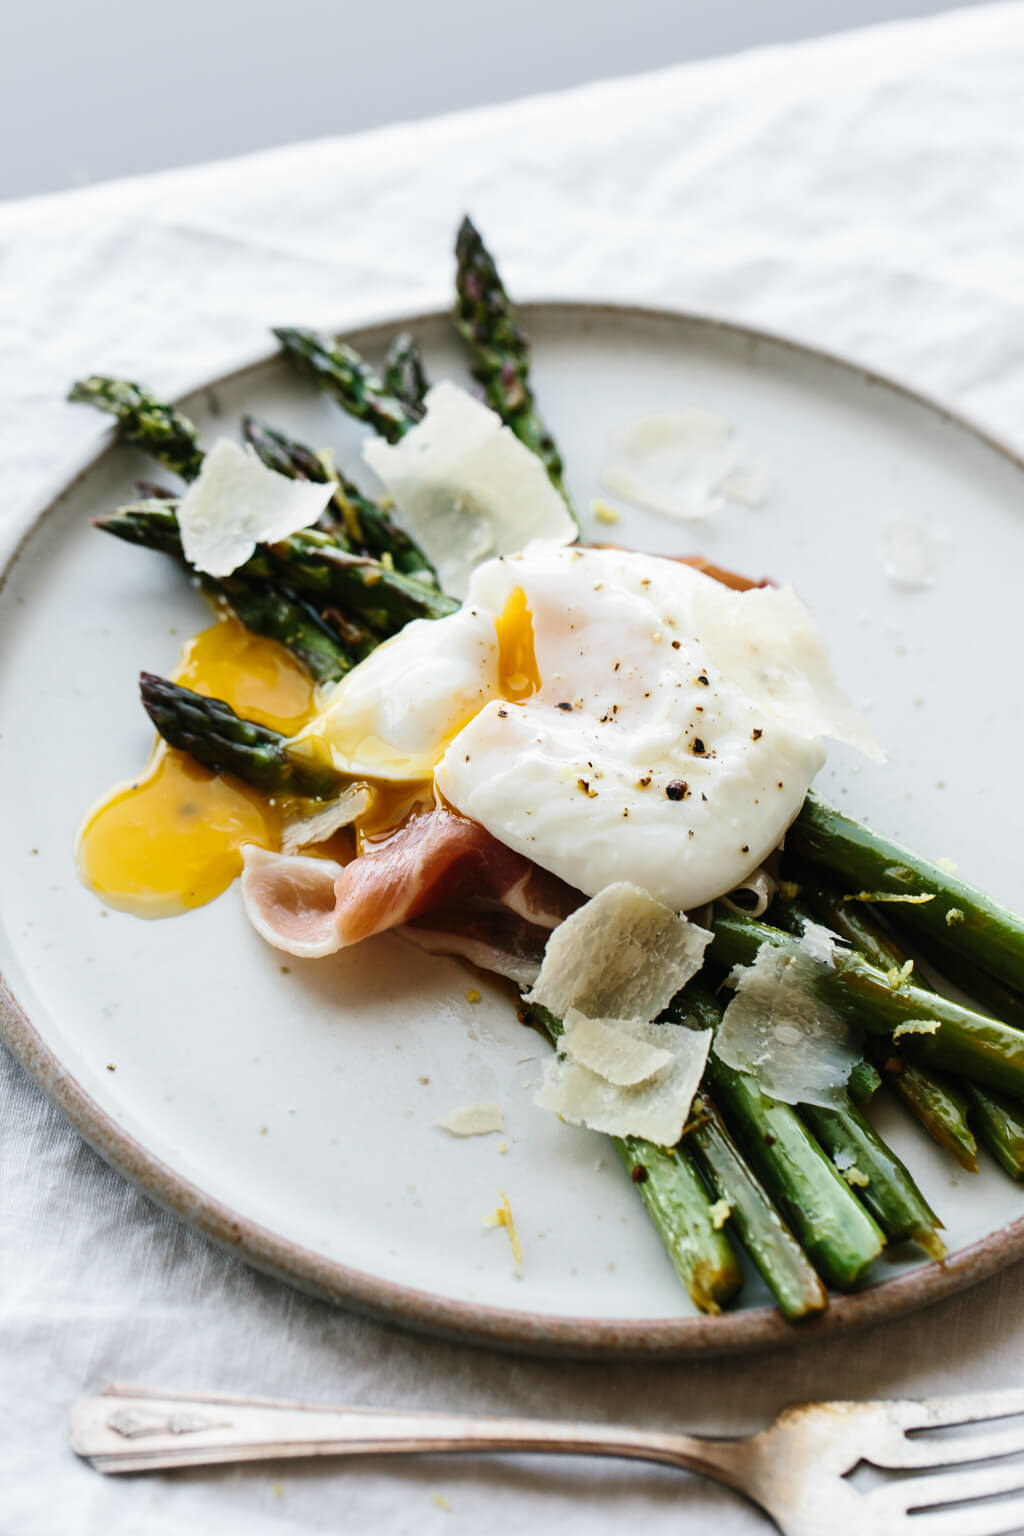 Grilled asparagus topped with prosciutto and a poached egg.